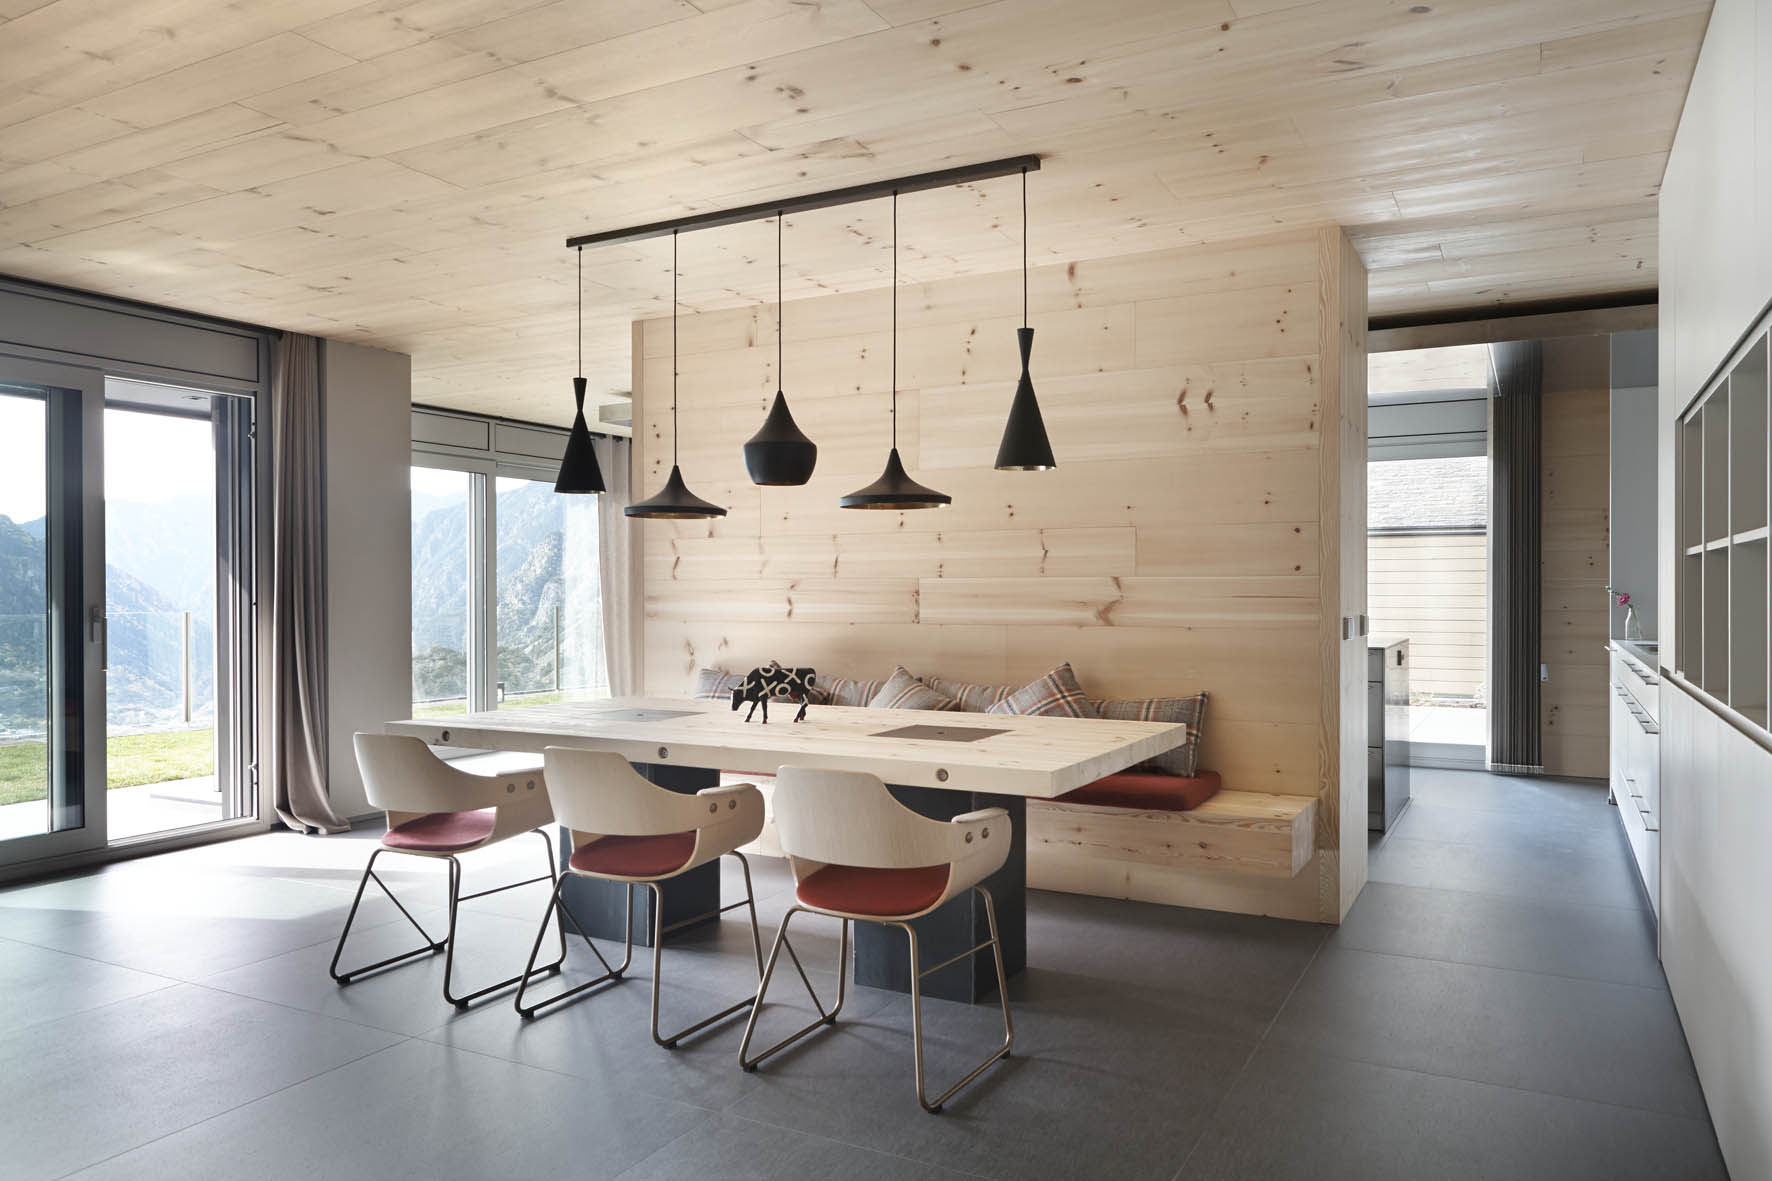 Inspiration in interior architecture with timber wood